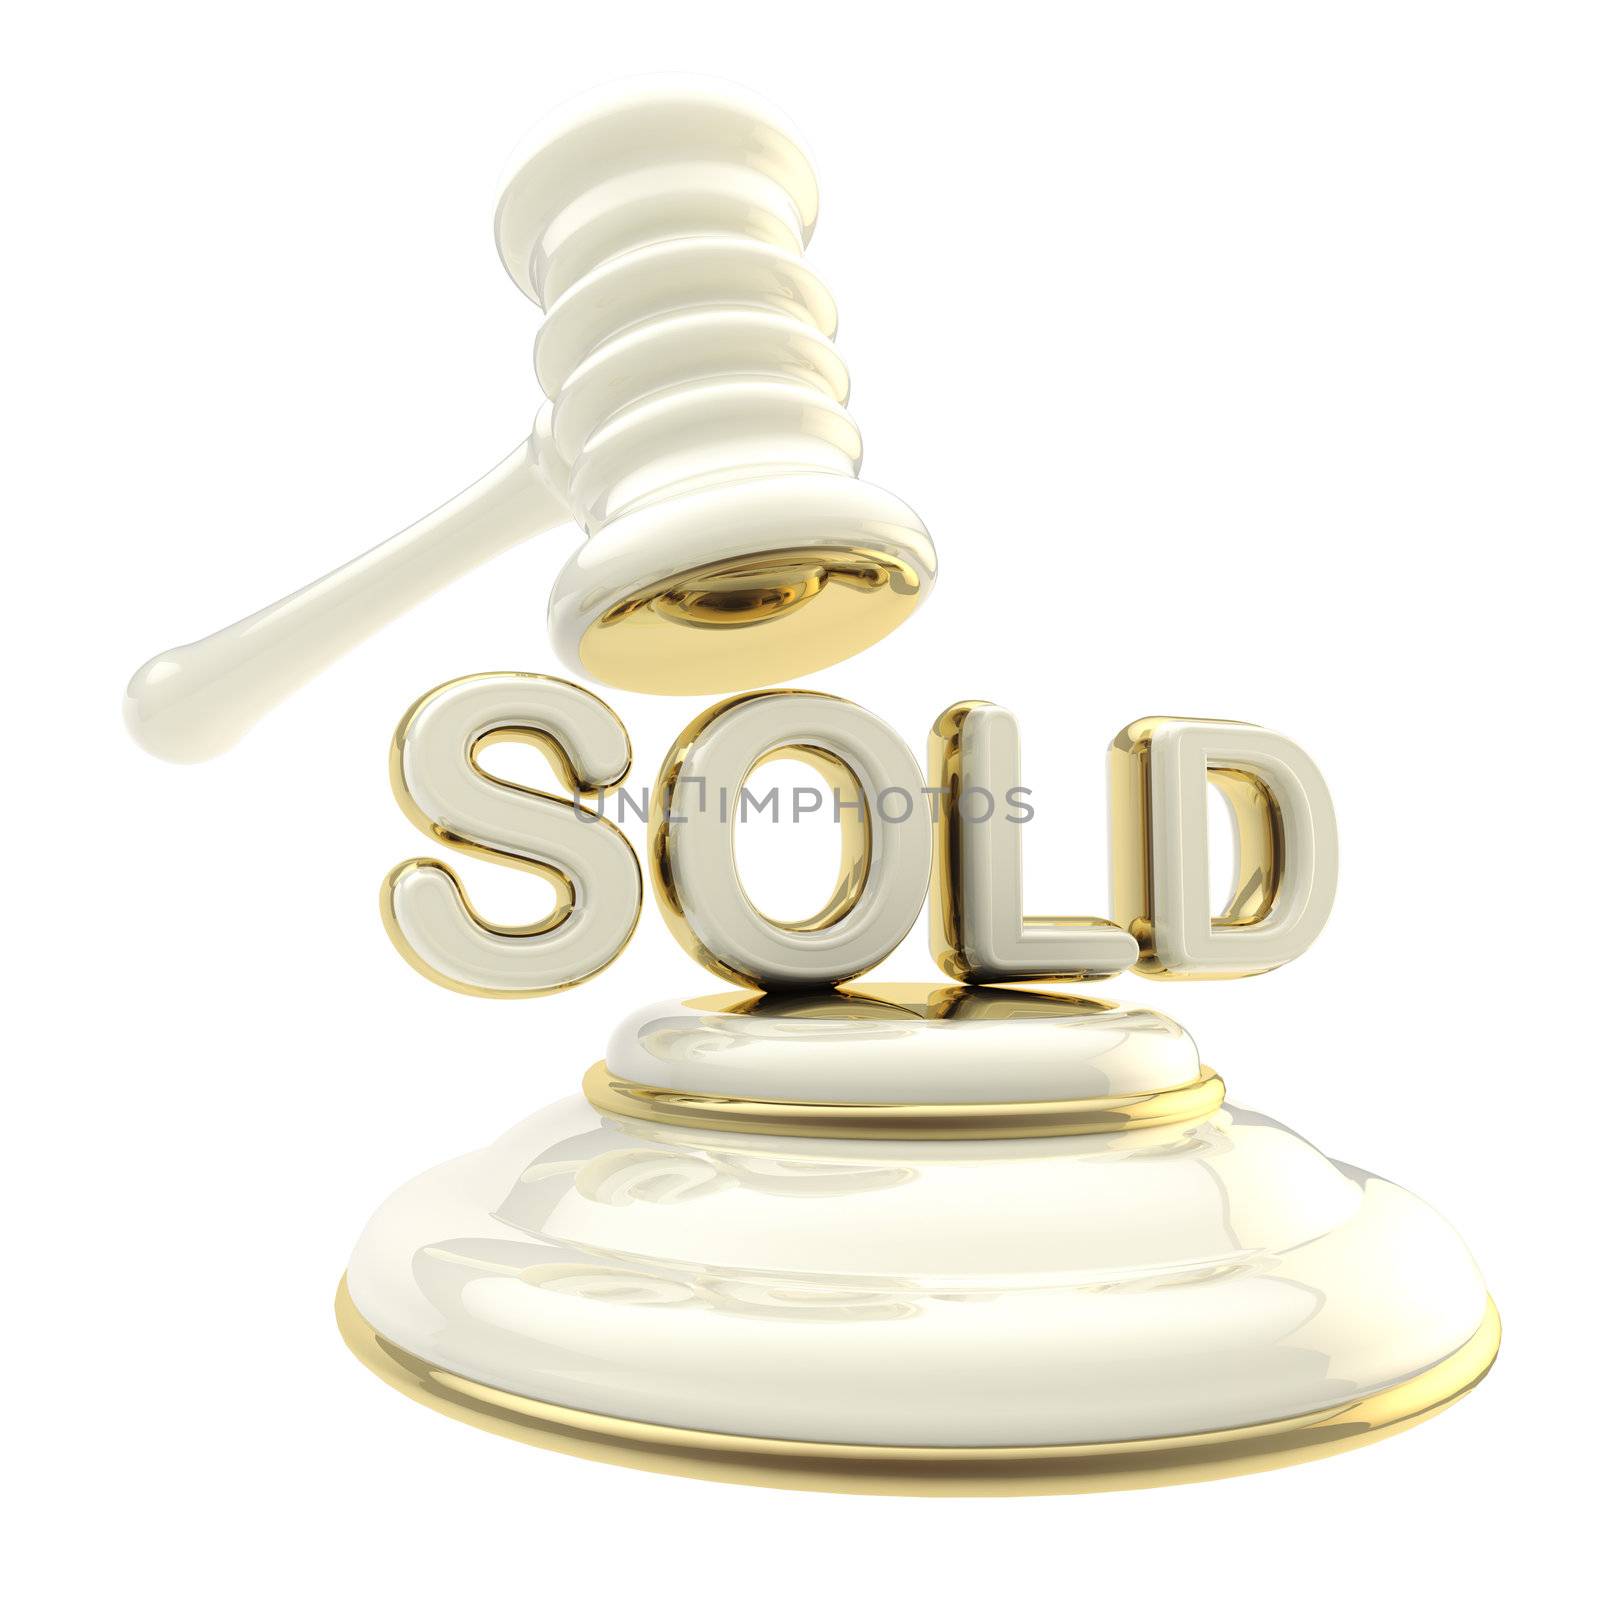 Auction: word "sold" under glossy white and golden gavel